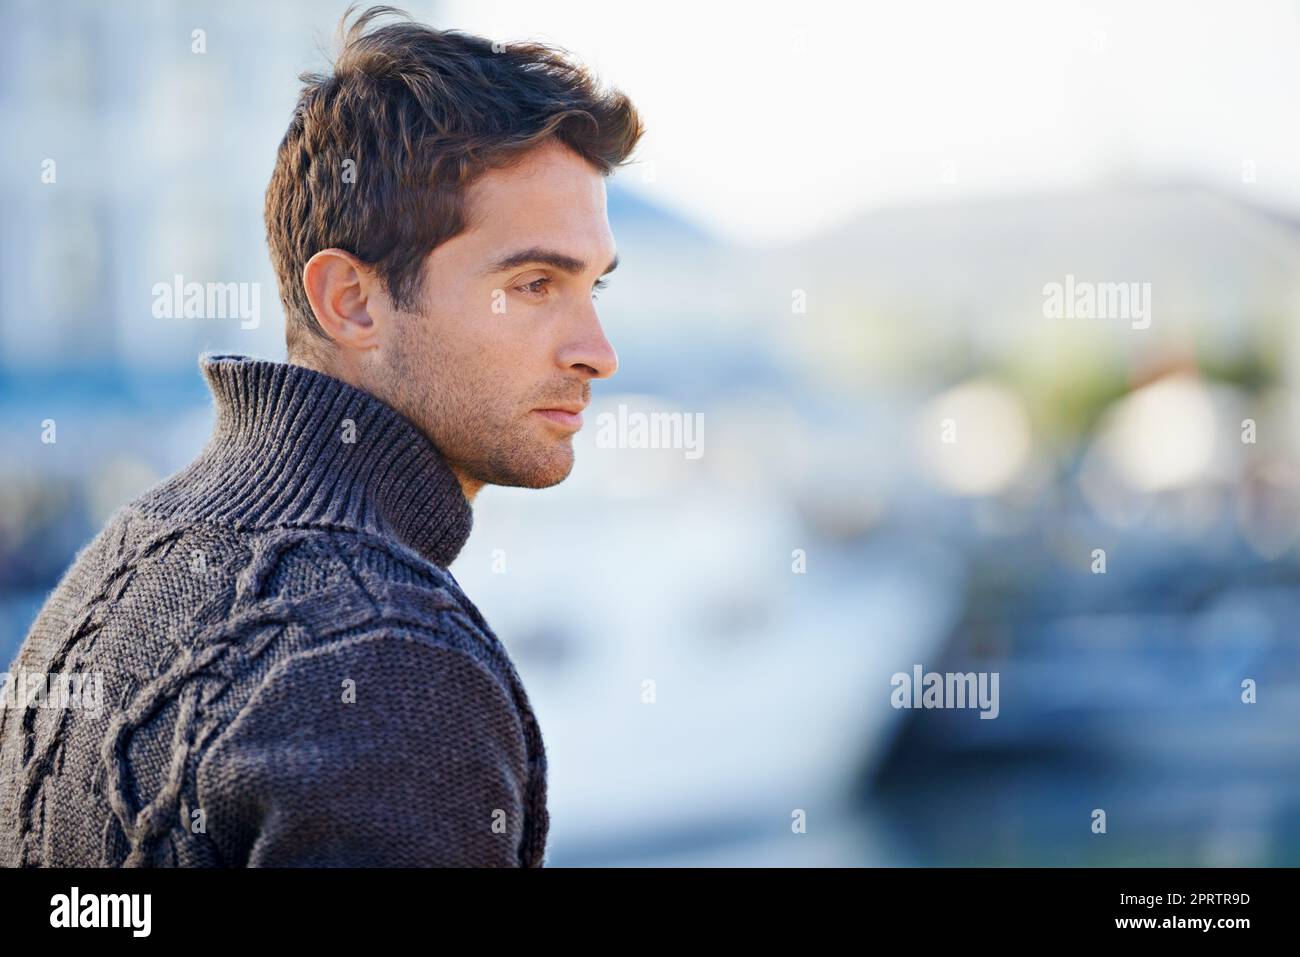 Soaking up the solitude. a handsome young man spending a day outdoors. Stock Photo